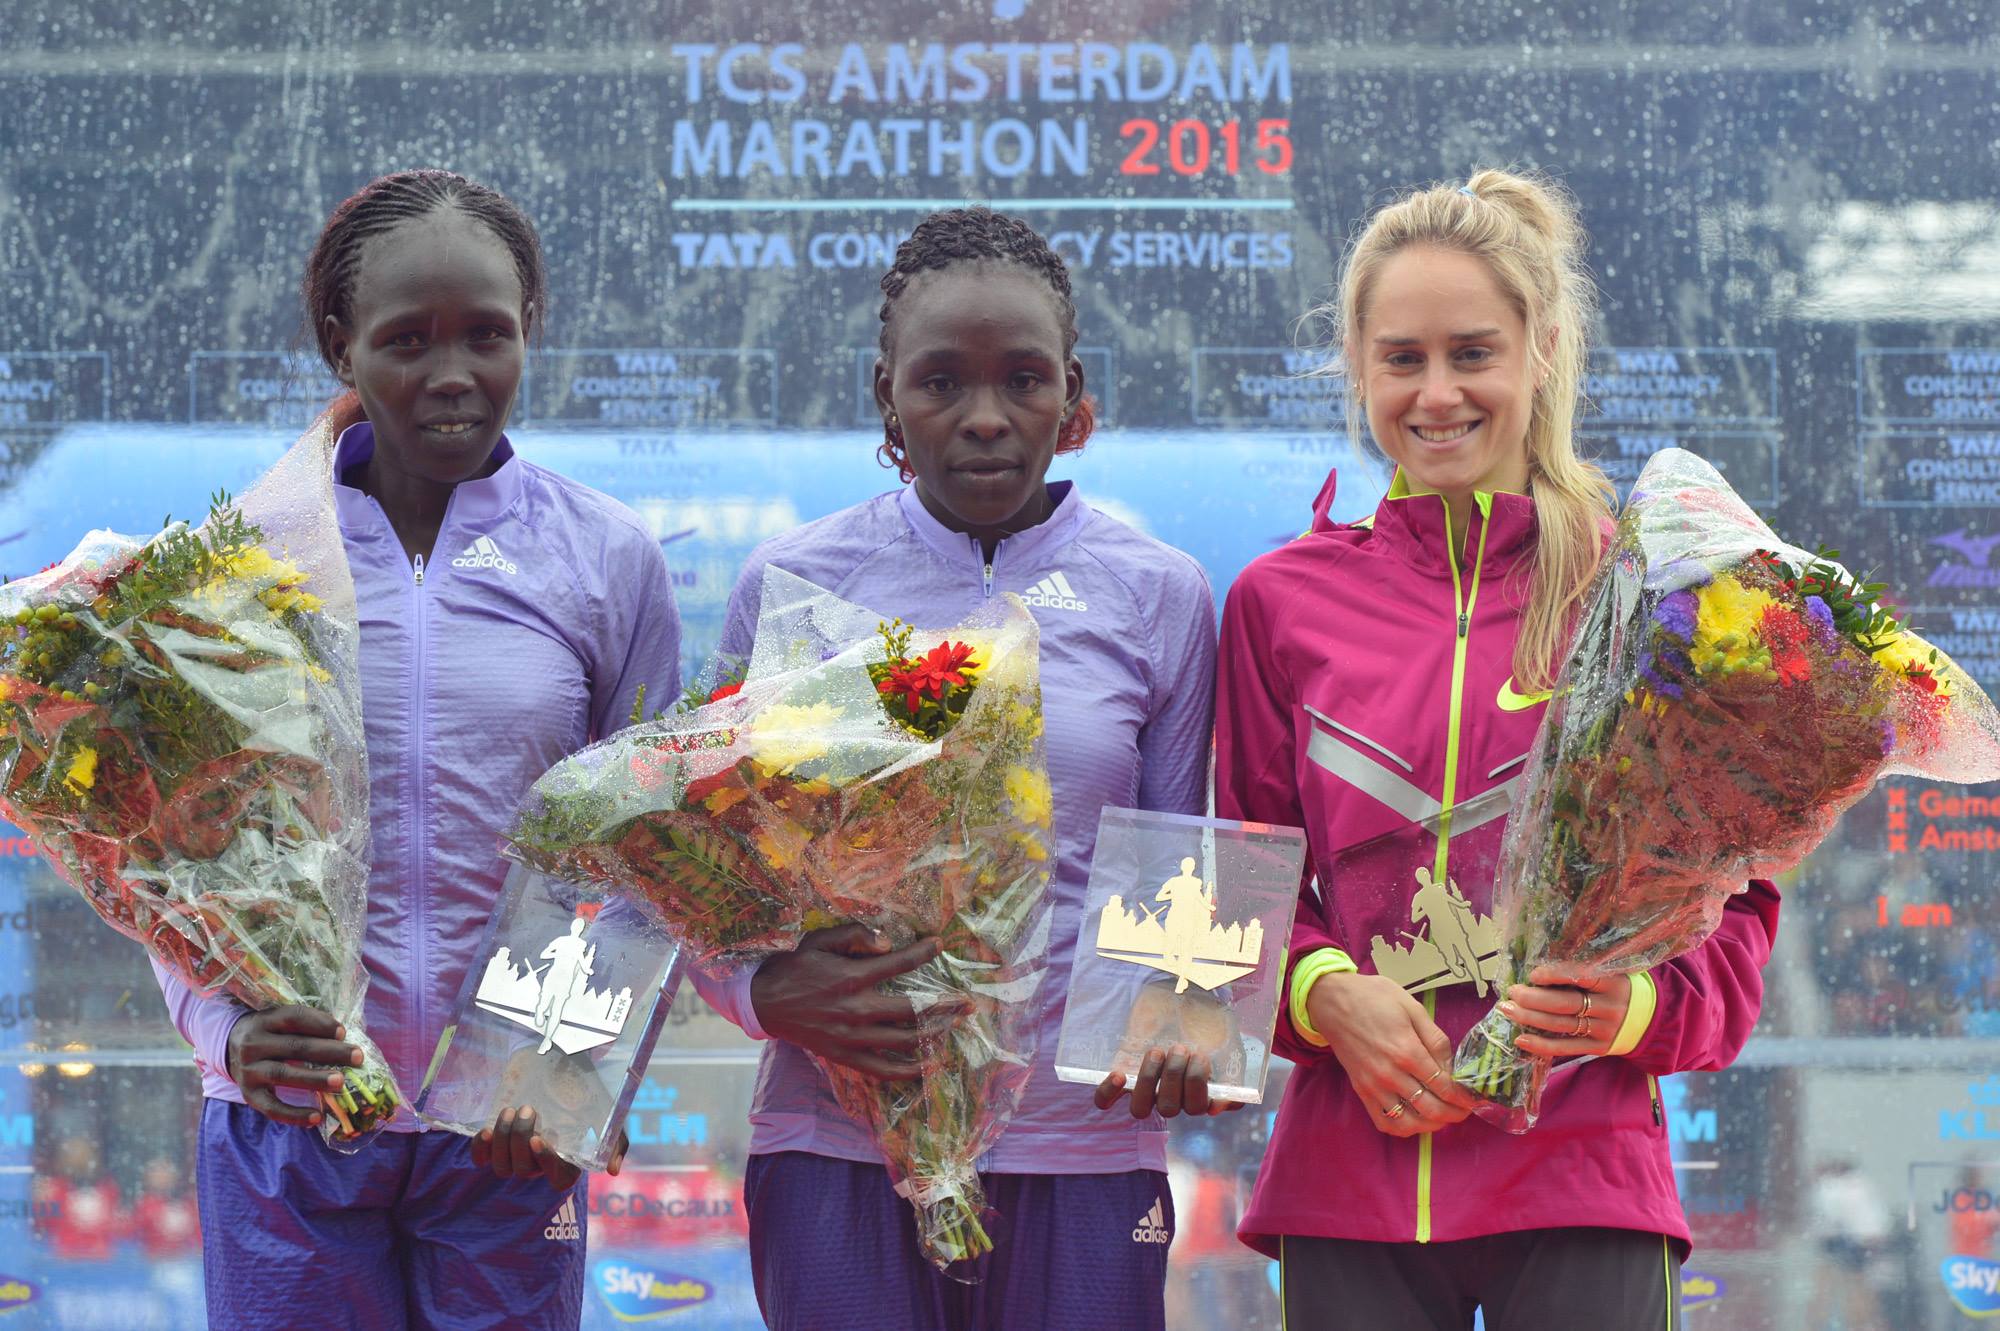 Milly Clark 3rd in the Amsterdam marathon 2015 with 2:29.07 